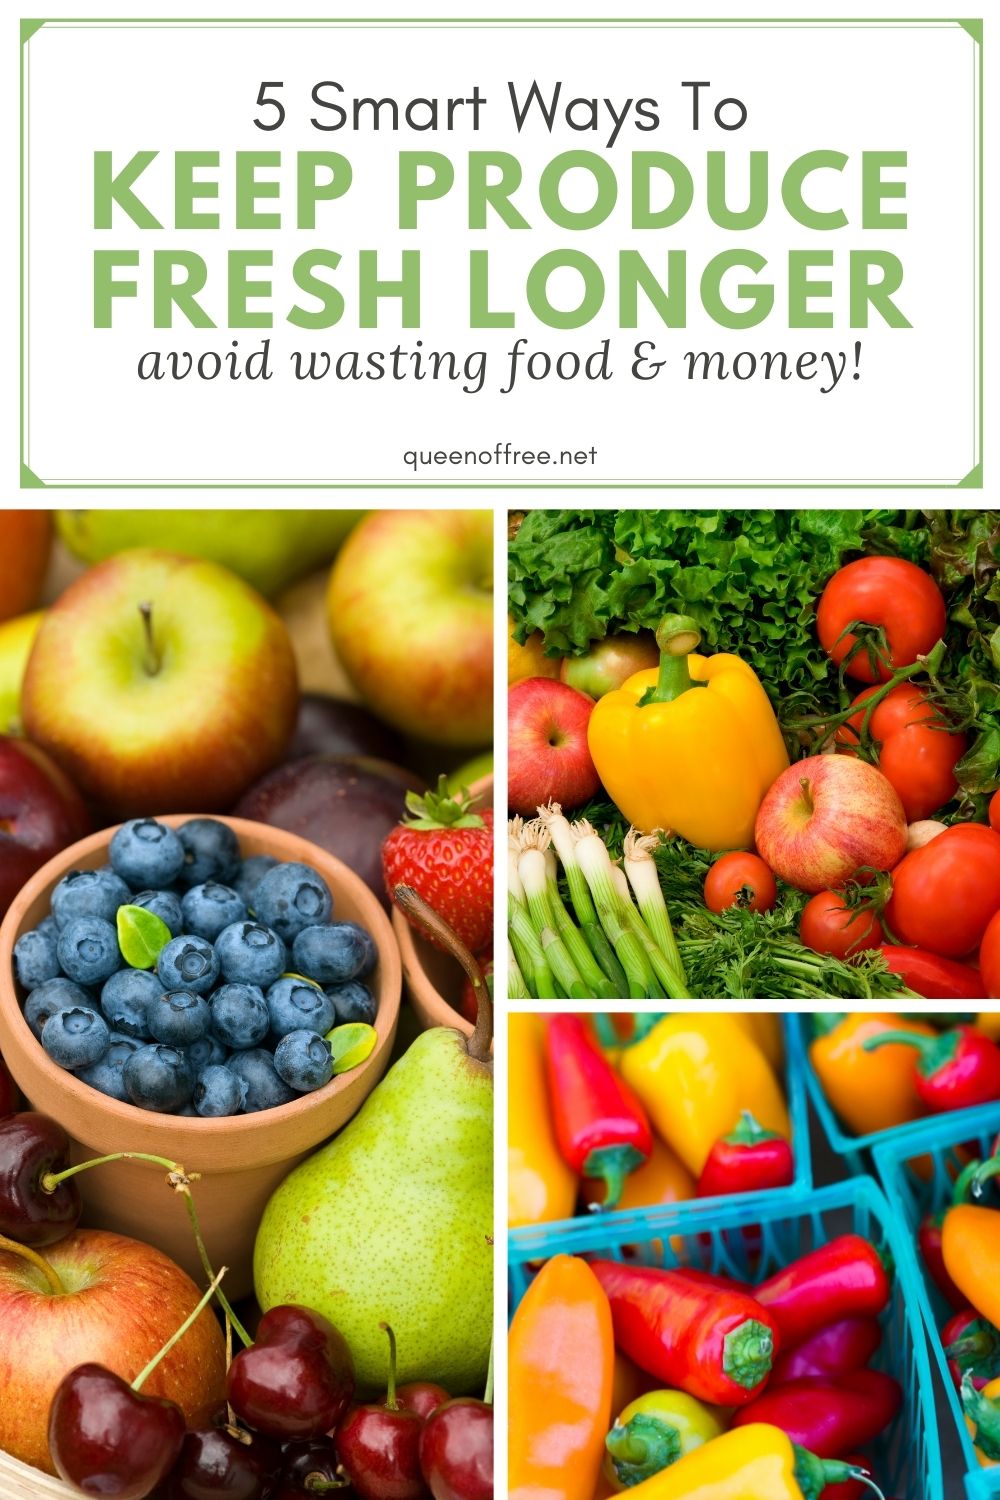 Taking a few easy and minor precautions can save both your food and your pennies. Read how to keep fruits and veggies fresh for longer.